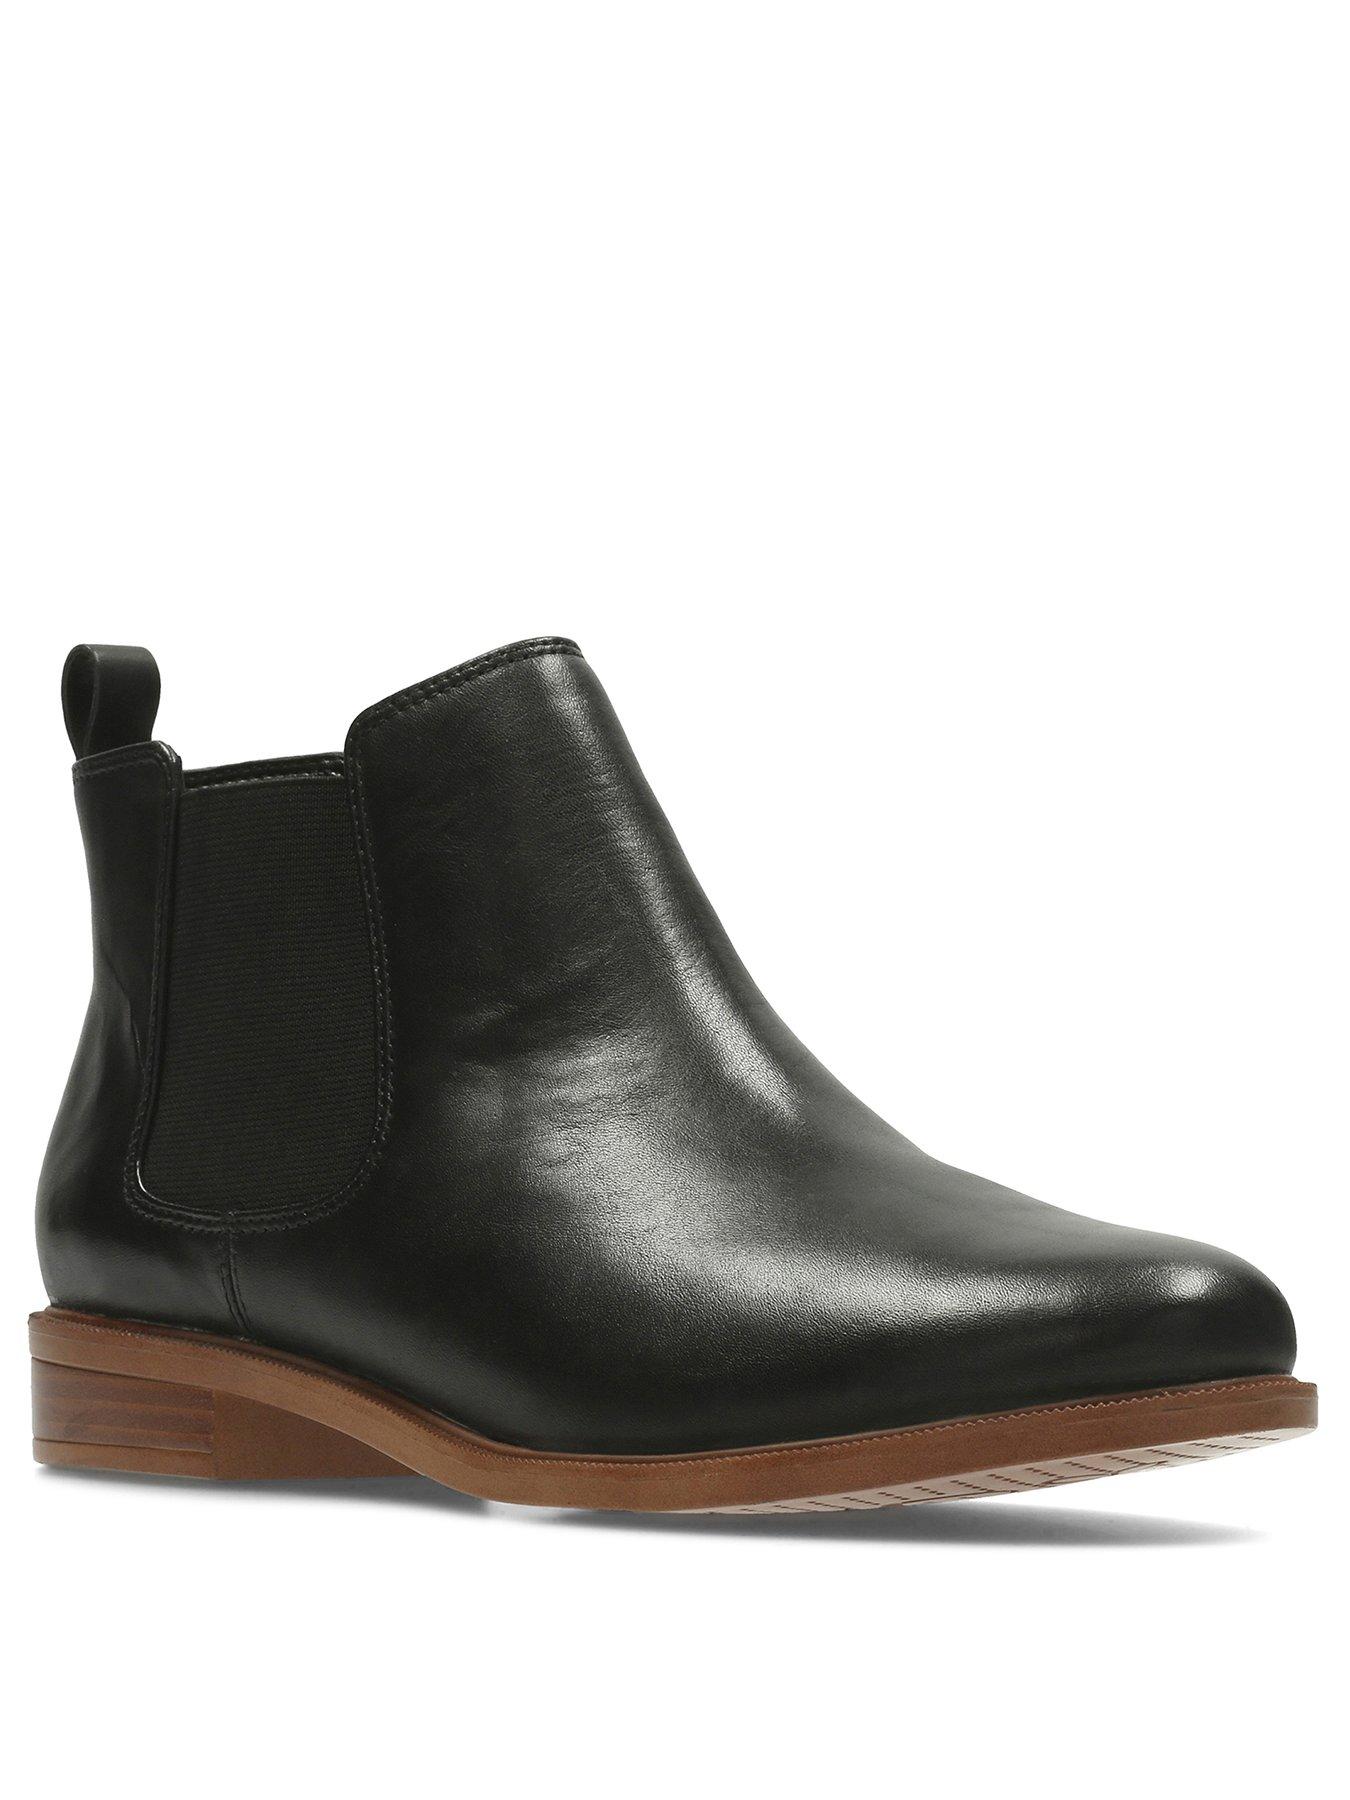 clarks soft leather ankle boots